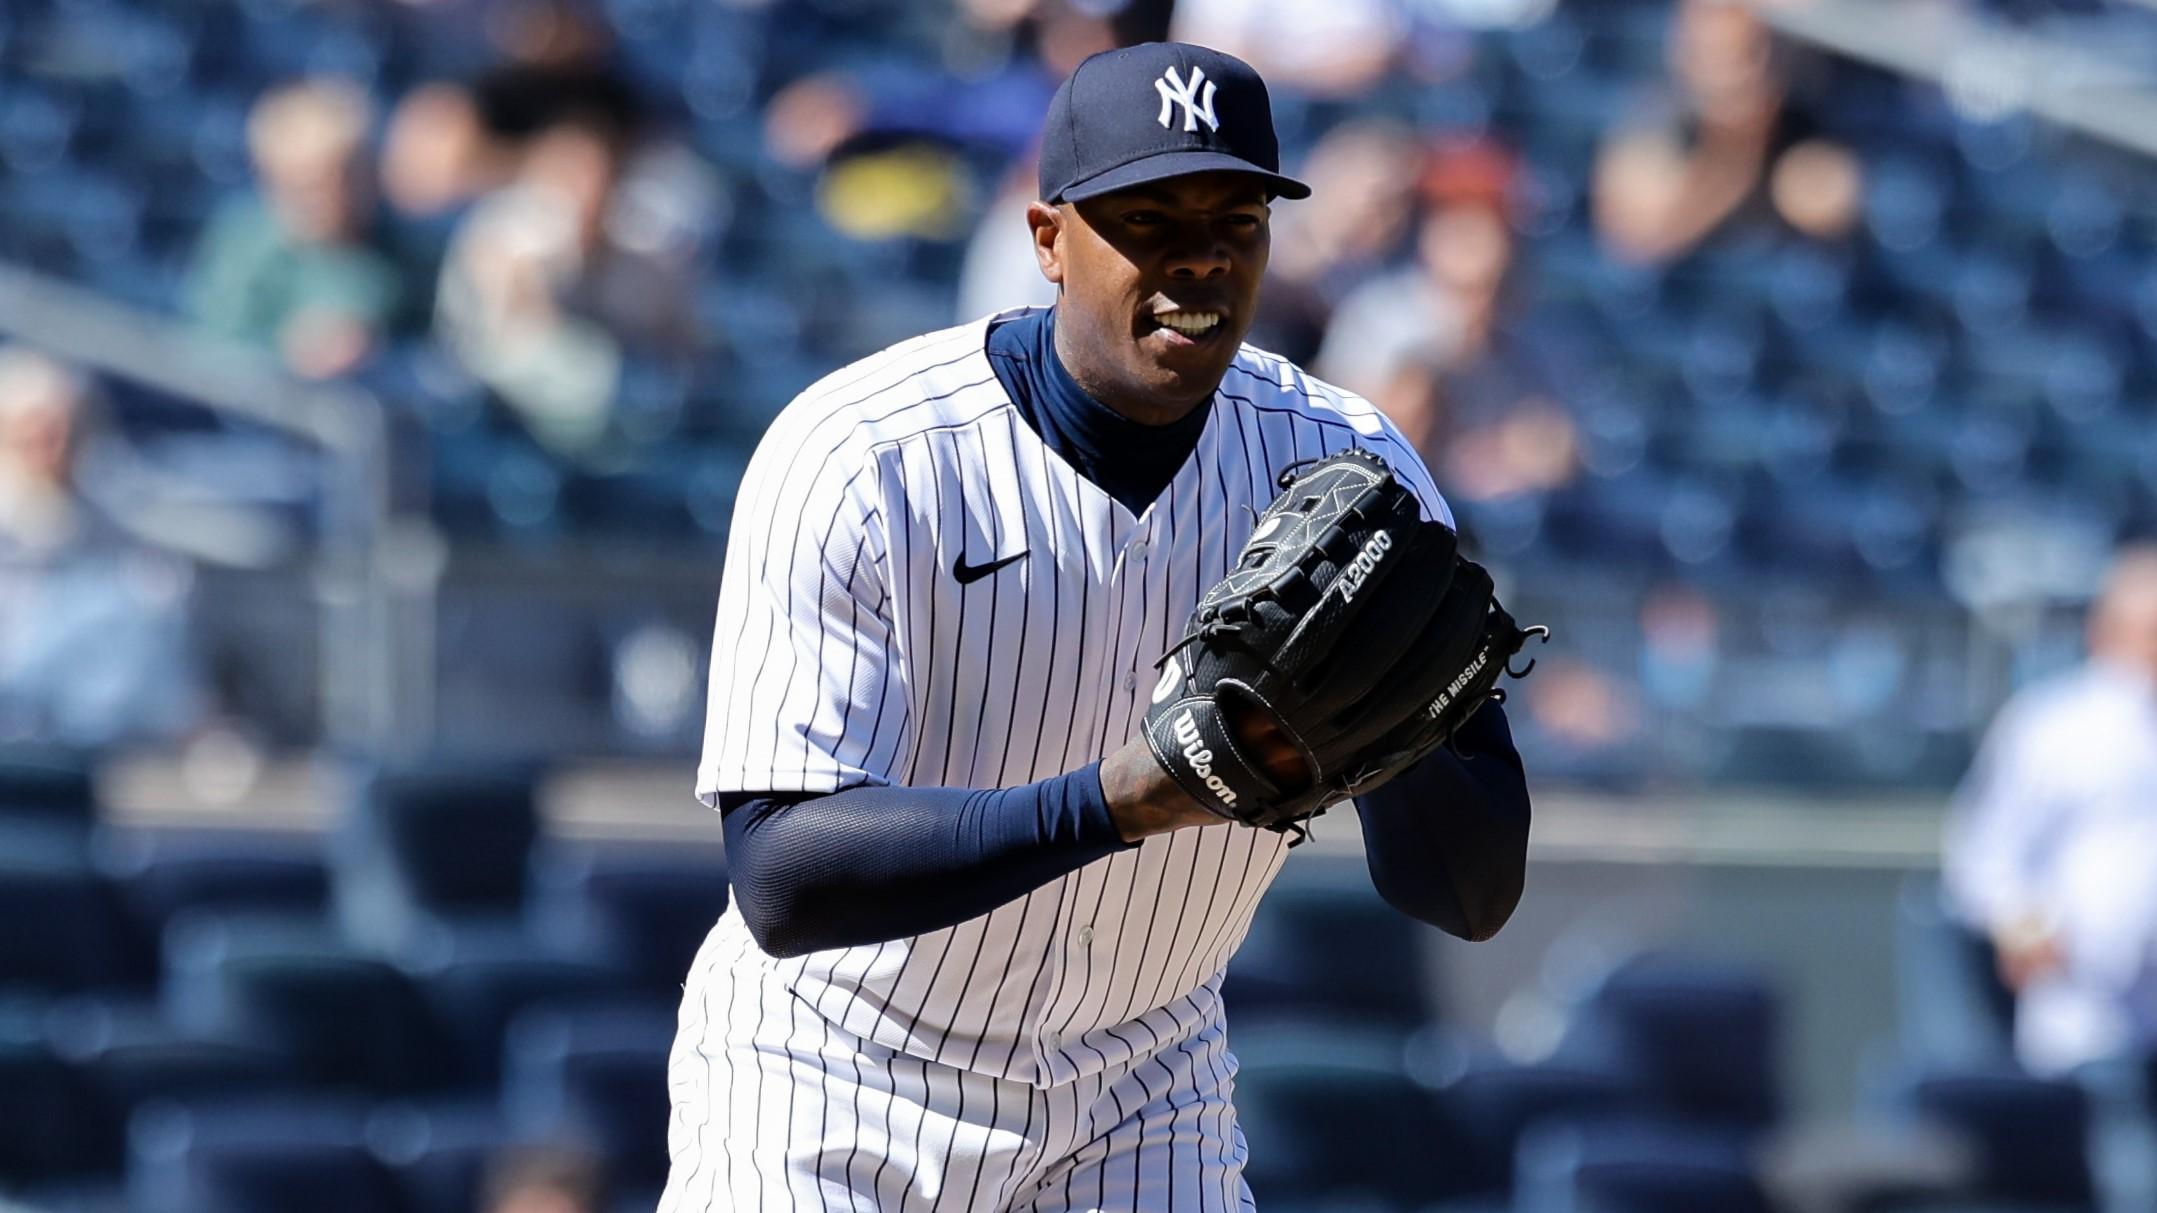 May 9, 2022; Bronx, New York, USA; New York Yankees relief pitcher Aroldis Chapman looks out during the ninth inning of a baseball game against the Texas Rangers at Yankee Stadium. Mandatory Credit: Jessica Alcheh-USA TODAY Sports / © Jessica Alcheh-USA TODAY Sports